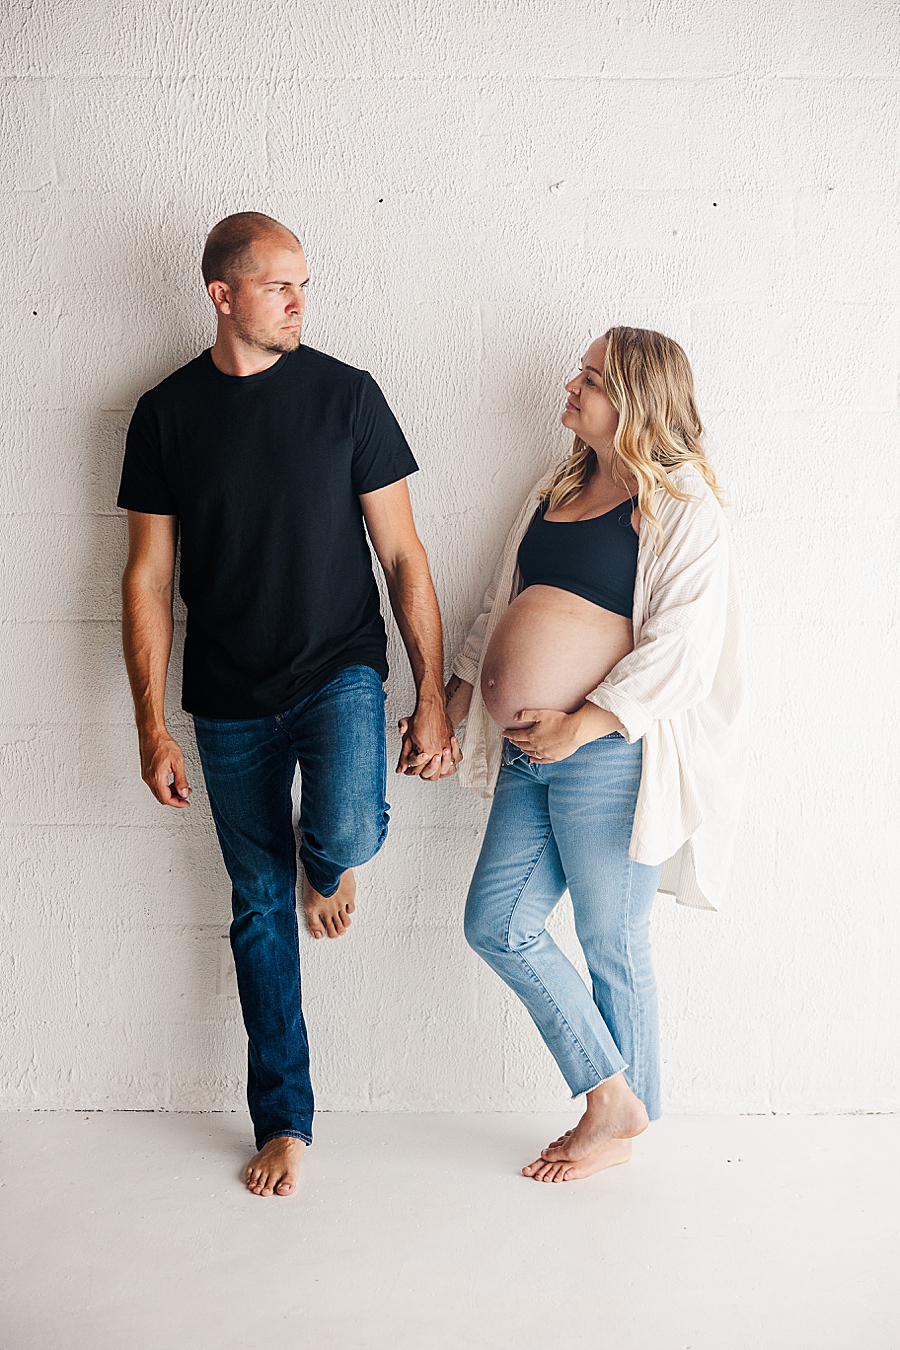 holding hands at highlight studio maternity session